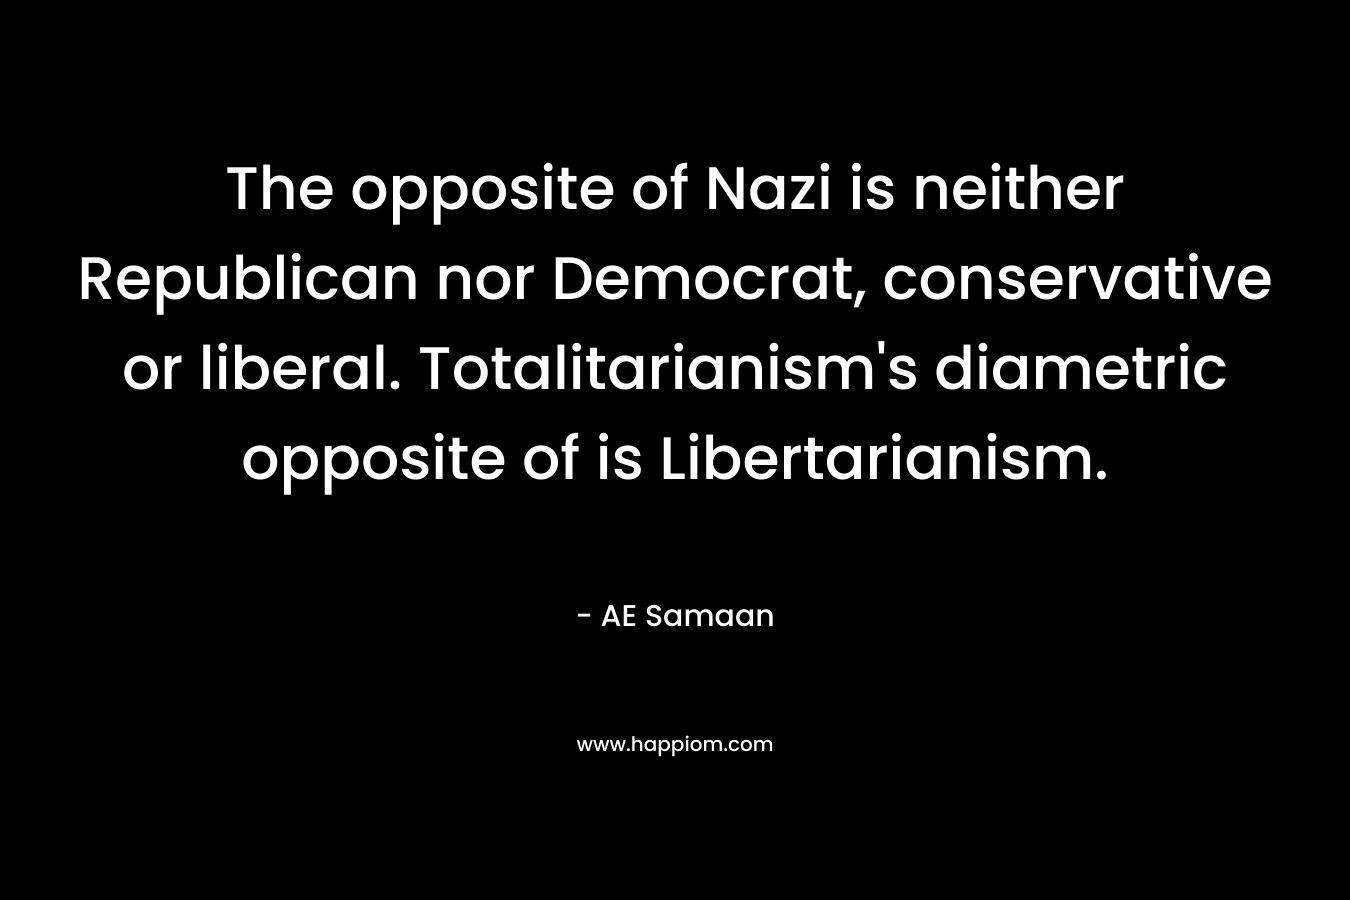 The opposite of Nazi is neither Republican nor Democrat, conservative or liberal. Totalitarianism's diametric opposite of is Libertarianism.